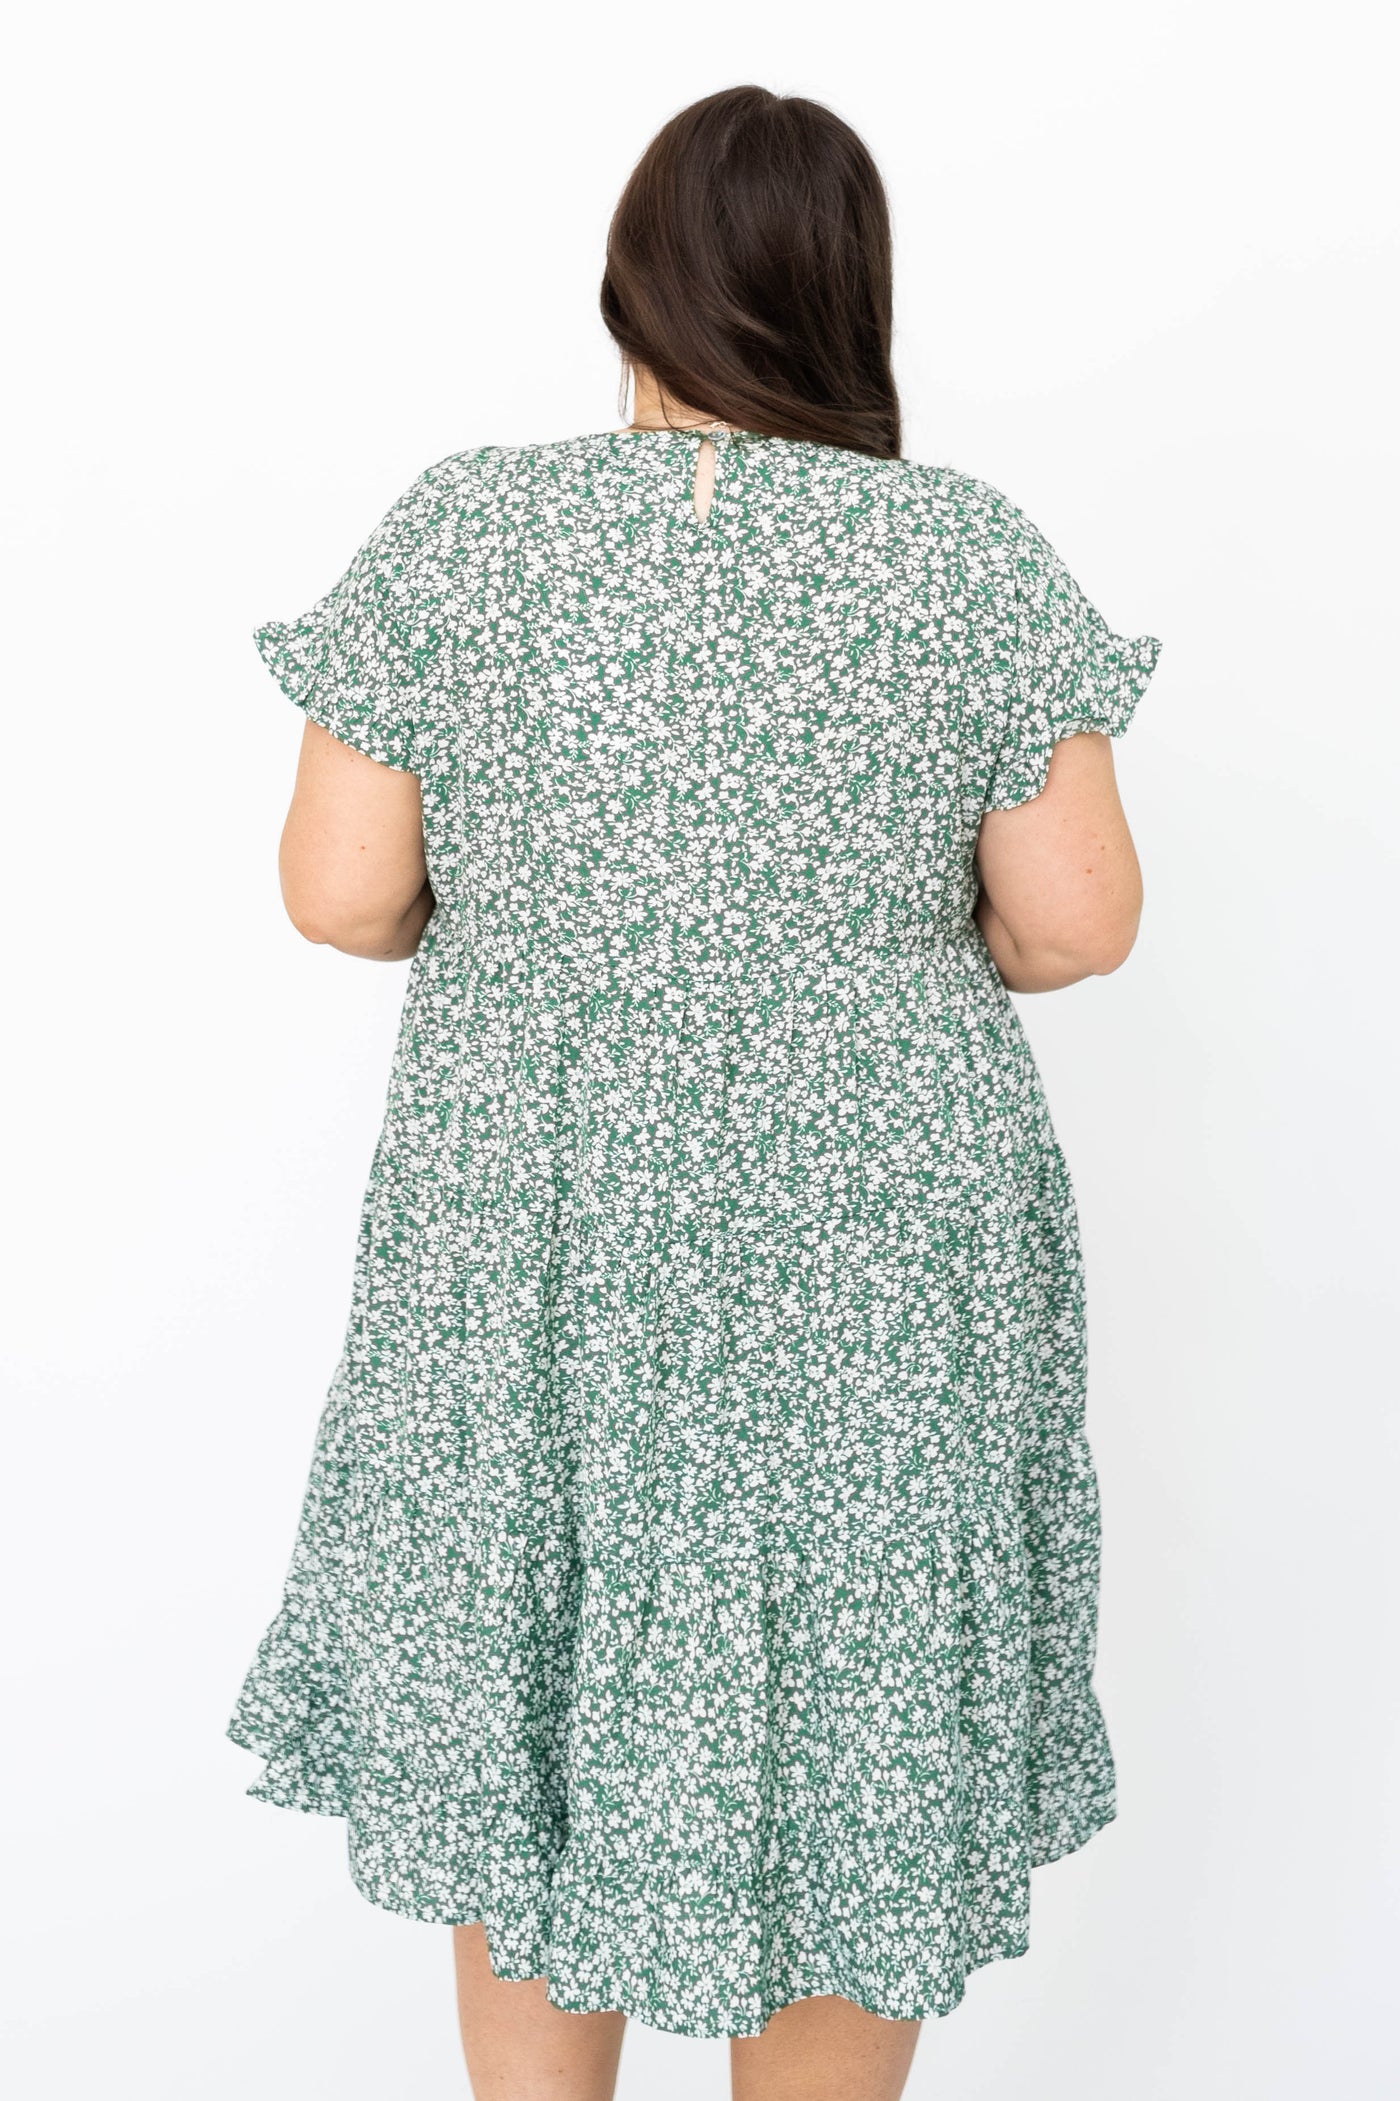 Back view of a plus size green floral dress